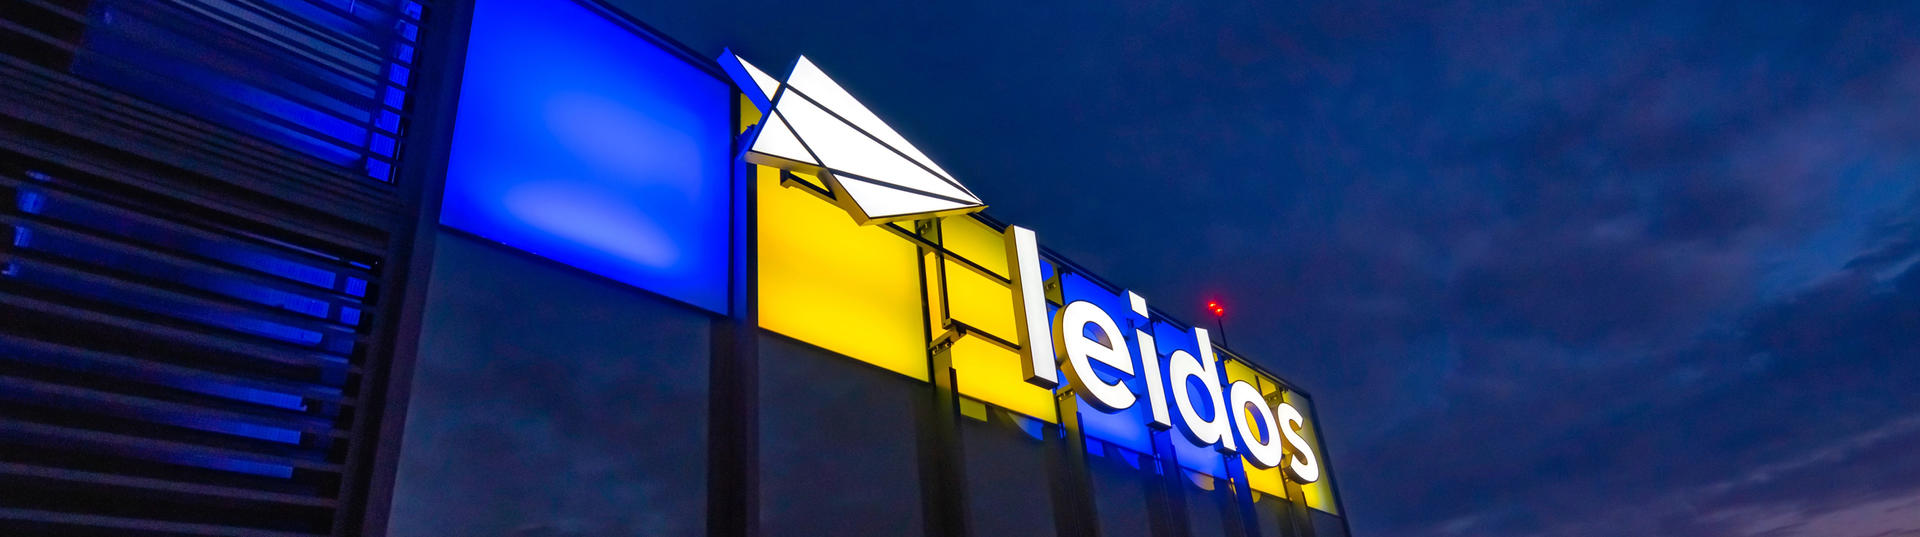 Leidos HQ building with yellow and blue accent lights